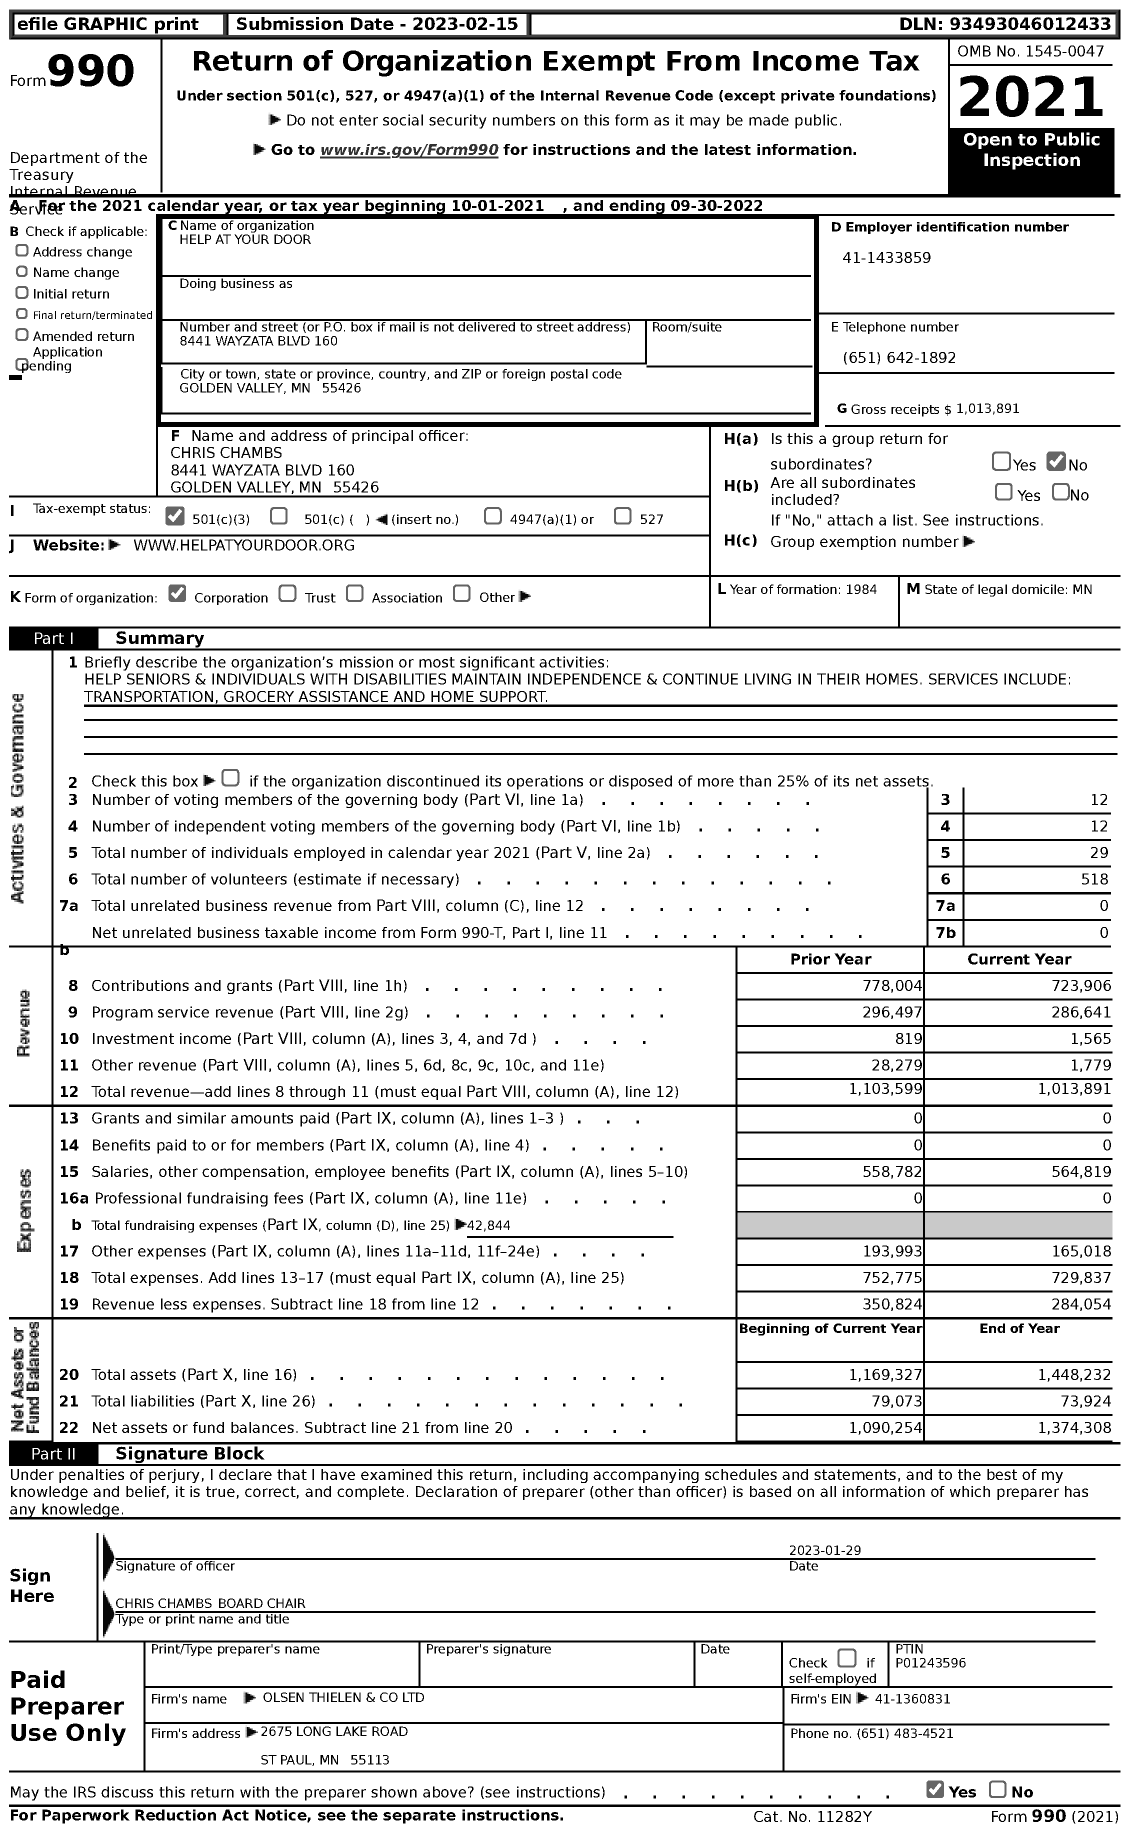 Image of first page of 2021 Form 990 for Help at Your Door